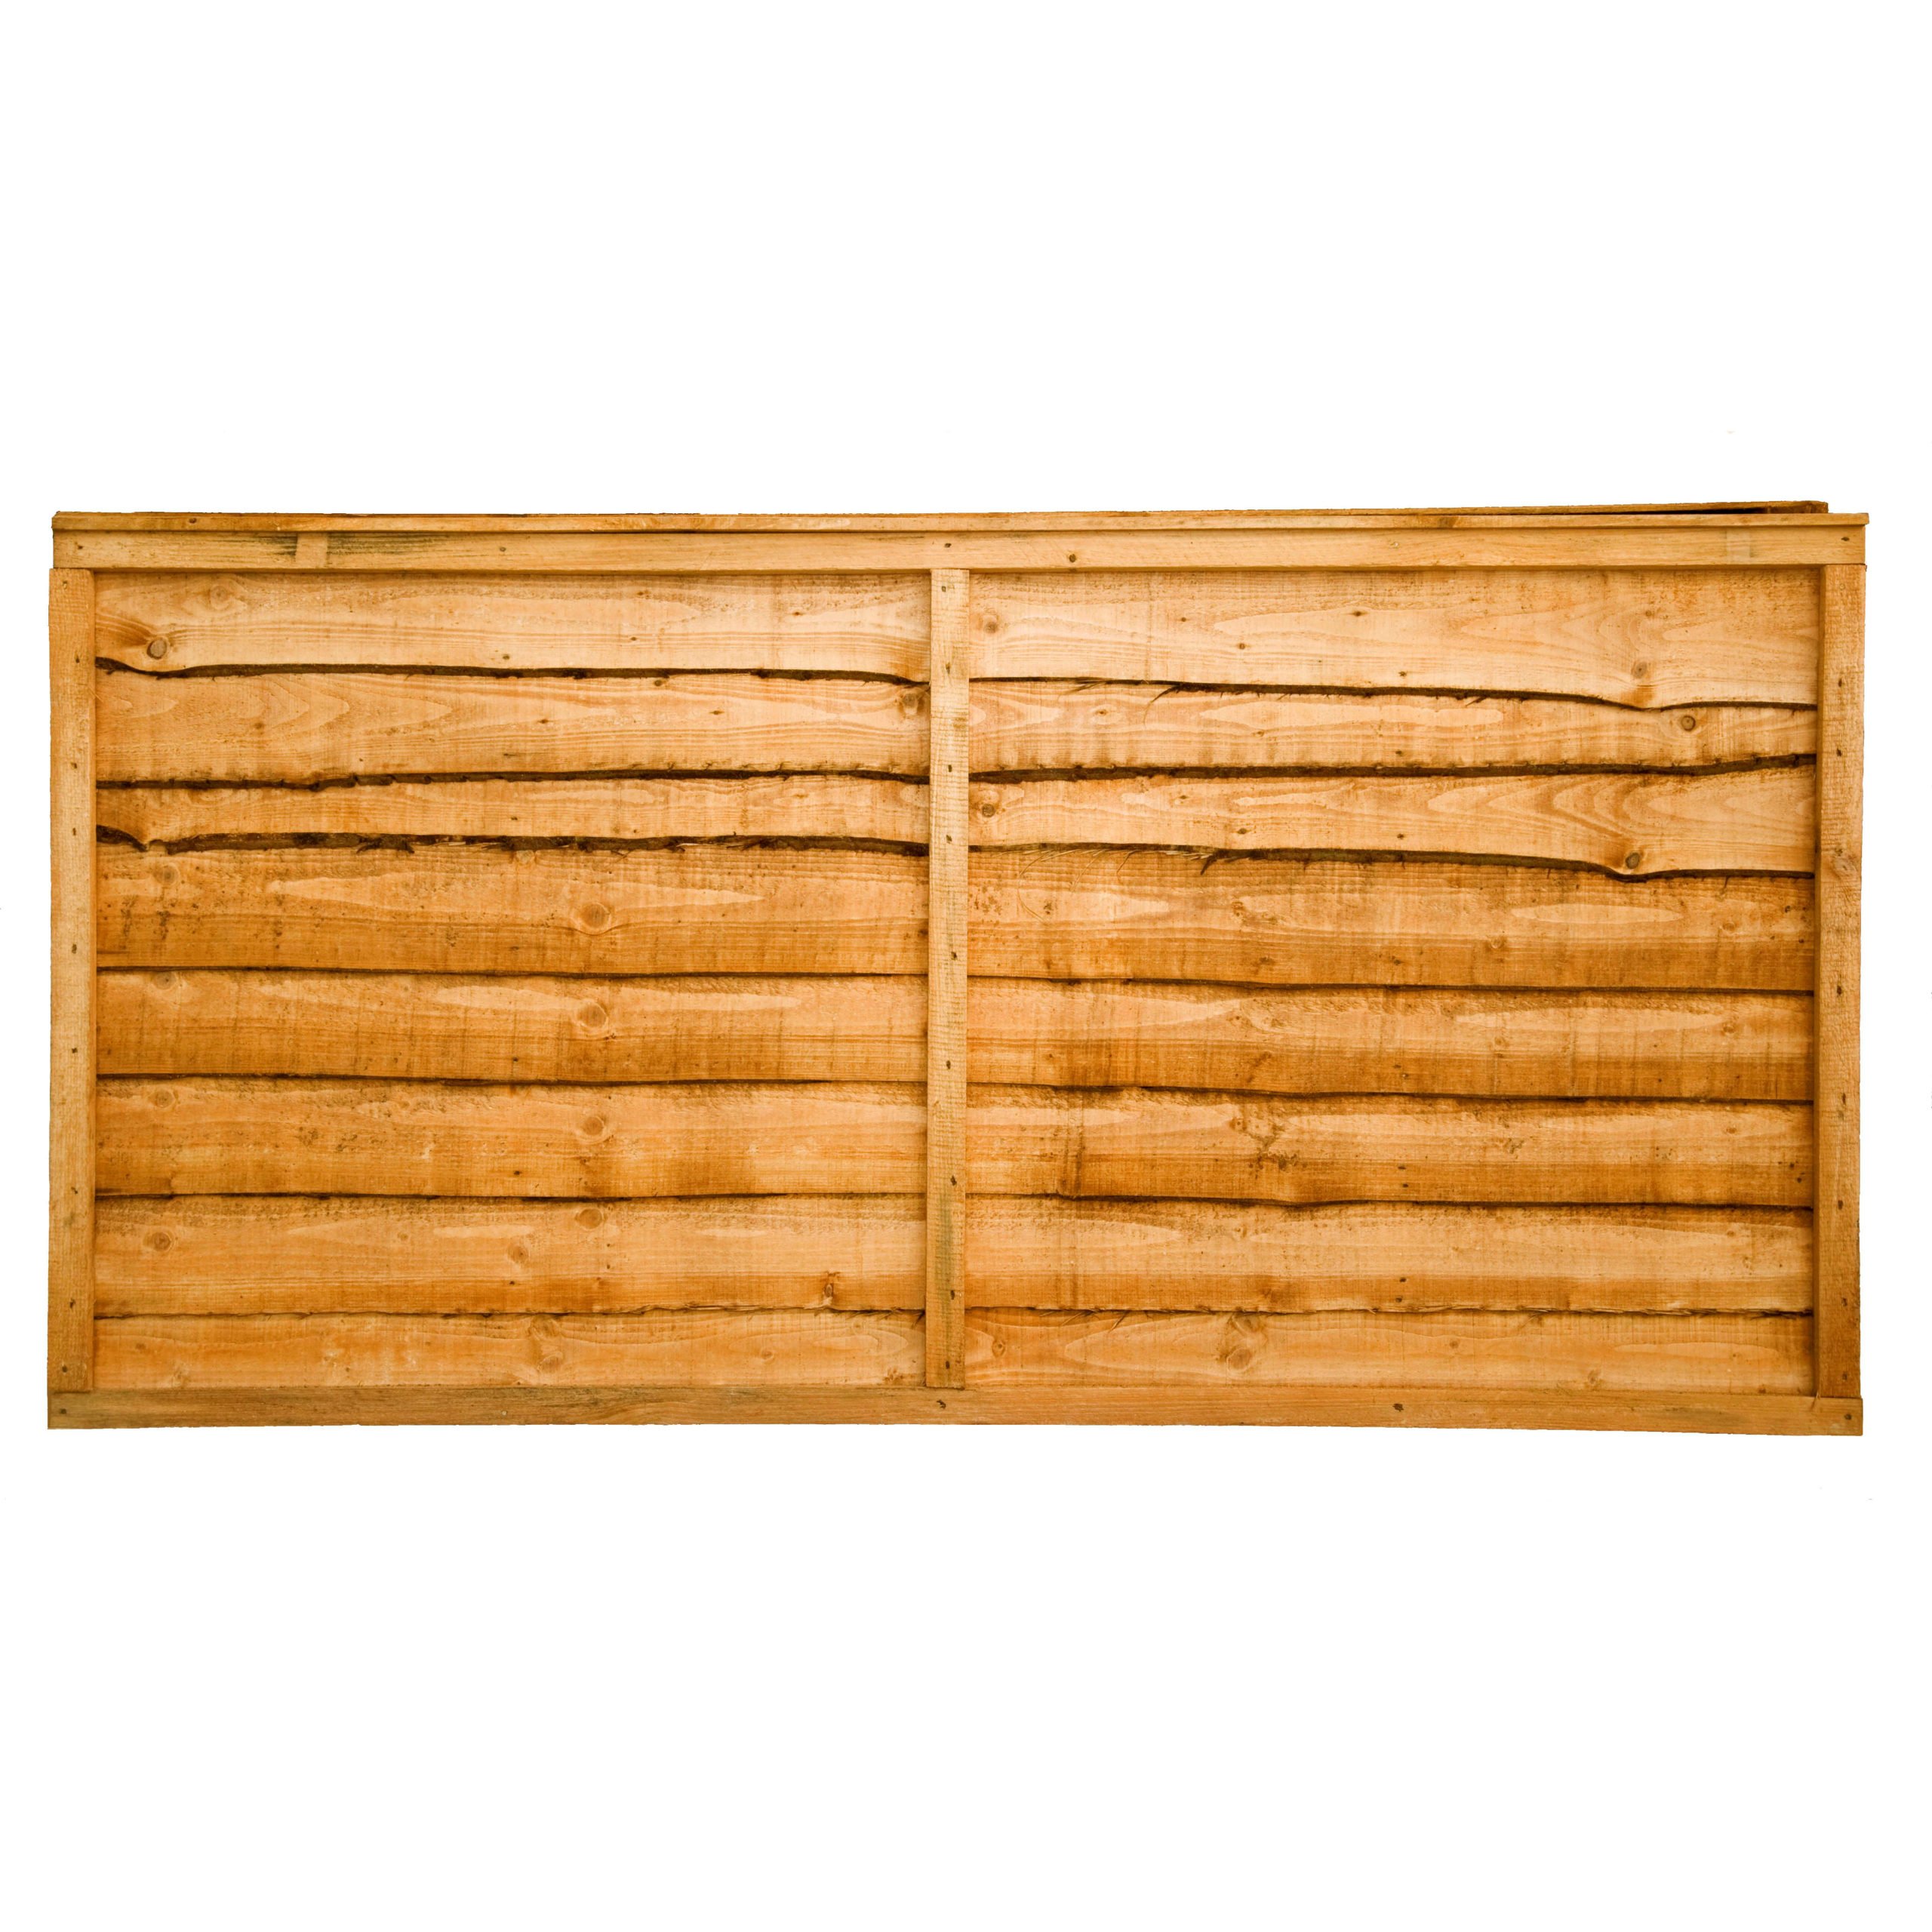 Waney Fencing Panels